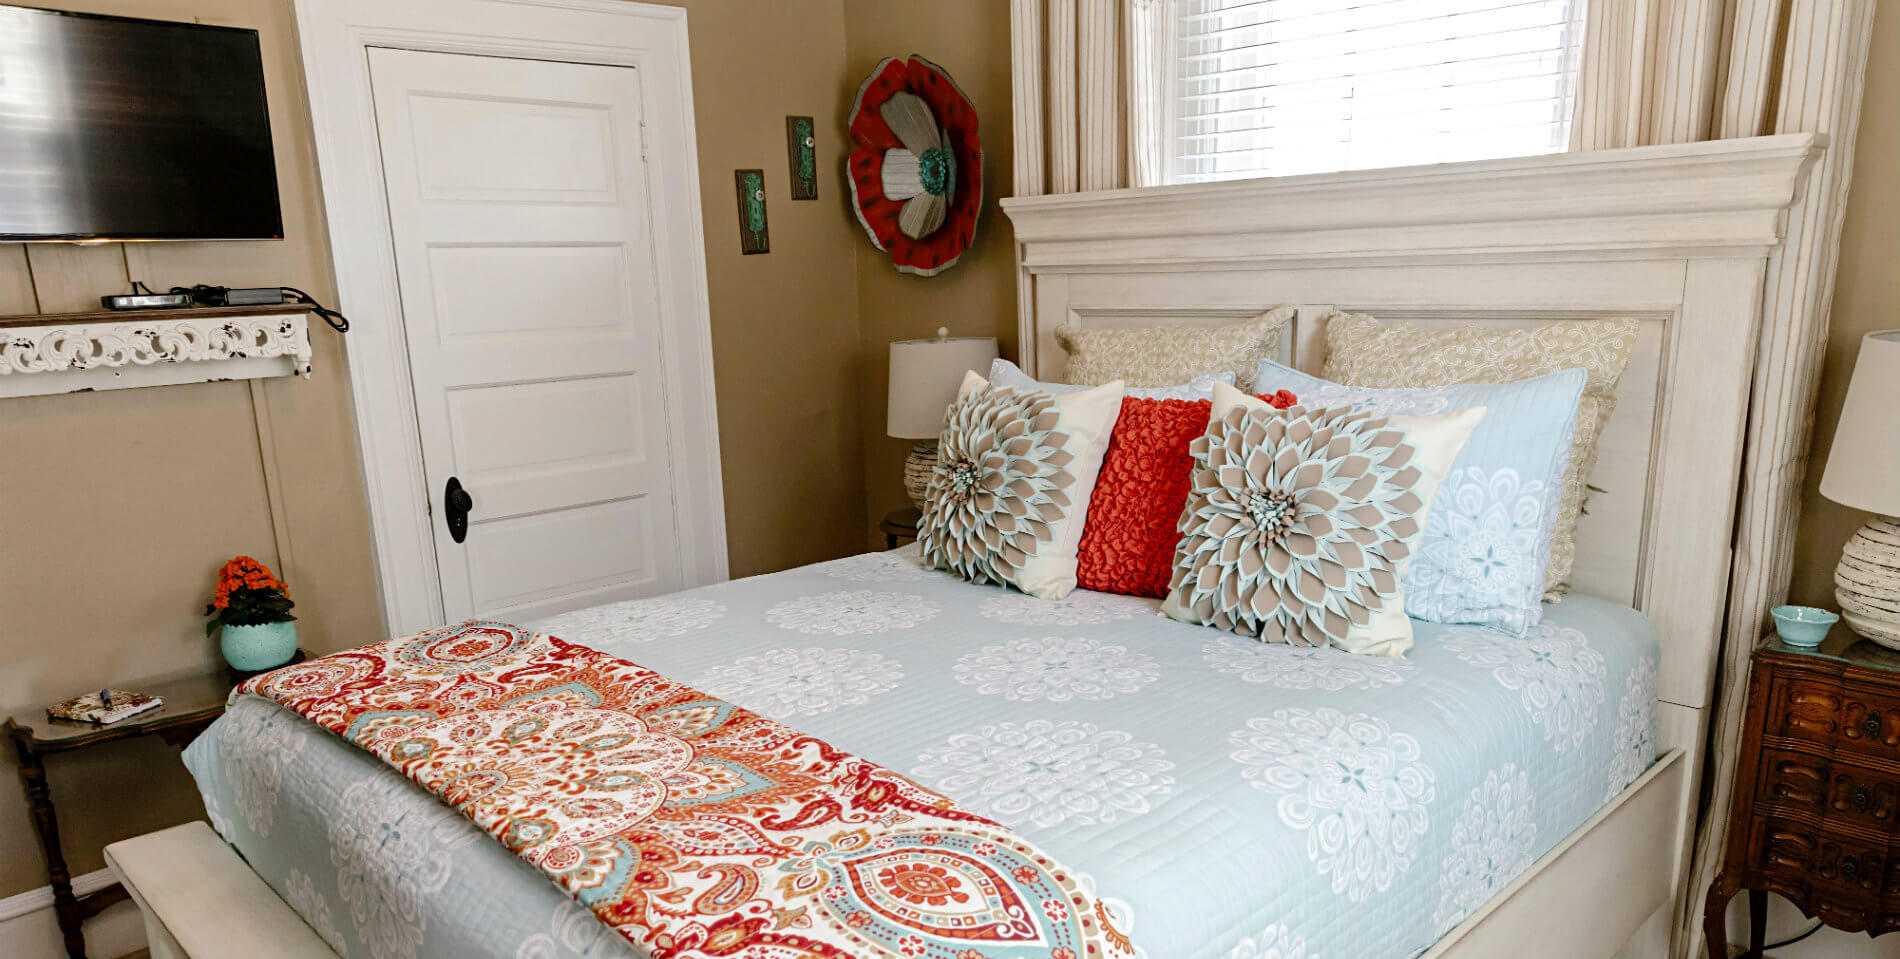 A bed on a white-washed wooden bedframe, a red paisley print throw at the foot of the bed. 